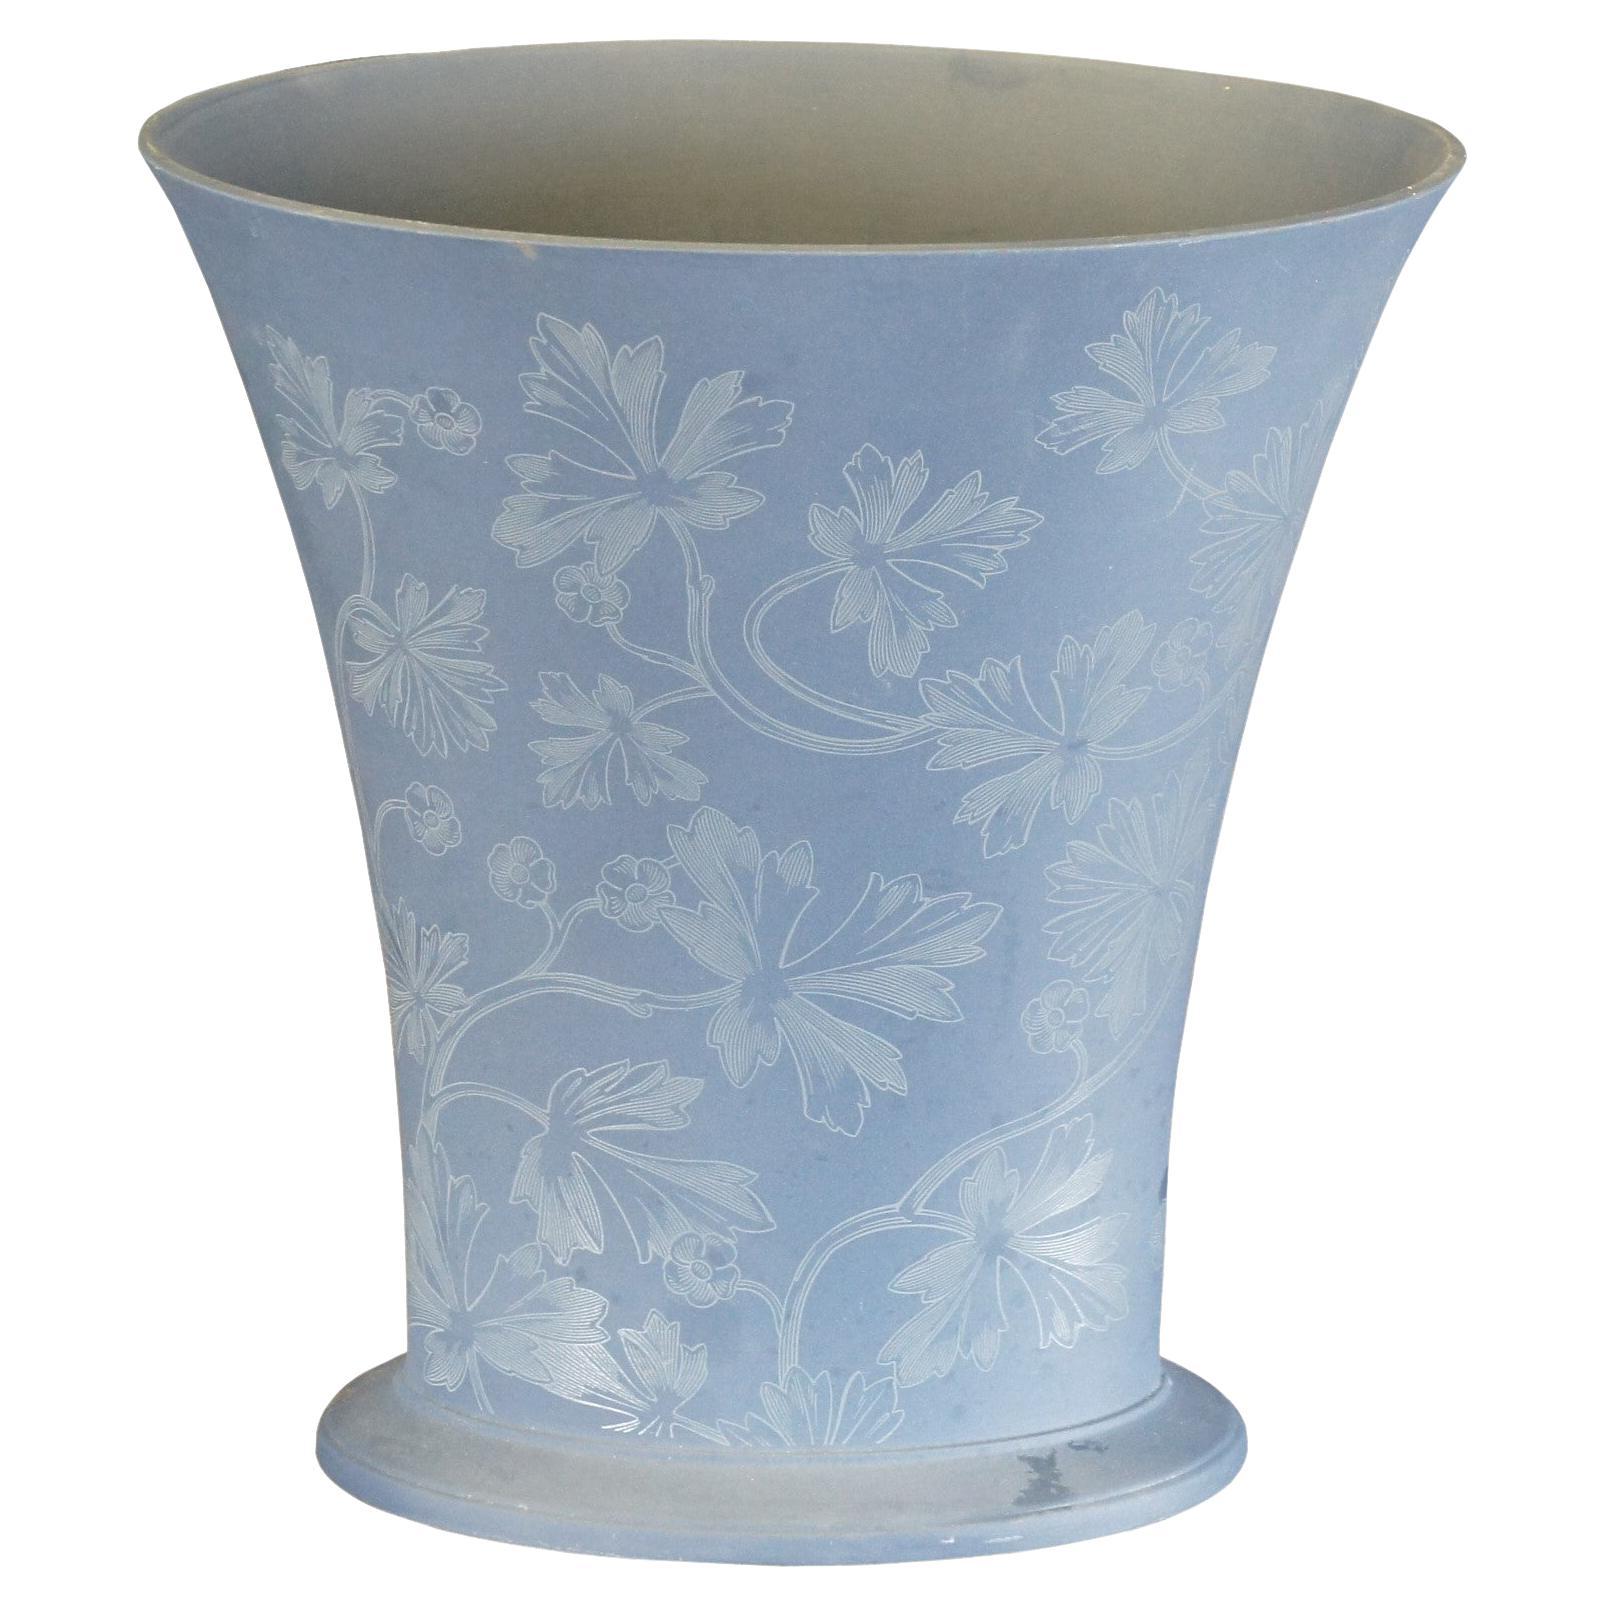 Wedgwood Interiors English Etched Floral Oval Footed Spray Vase 10"